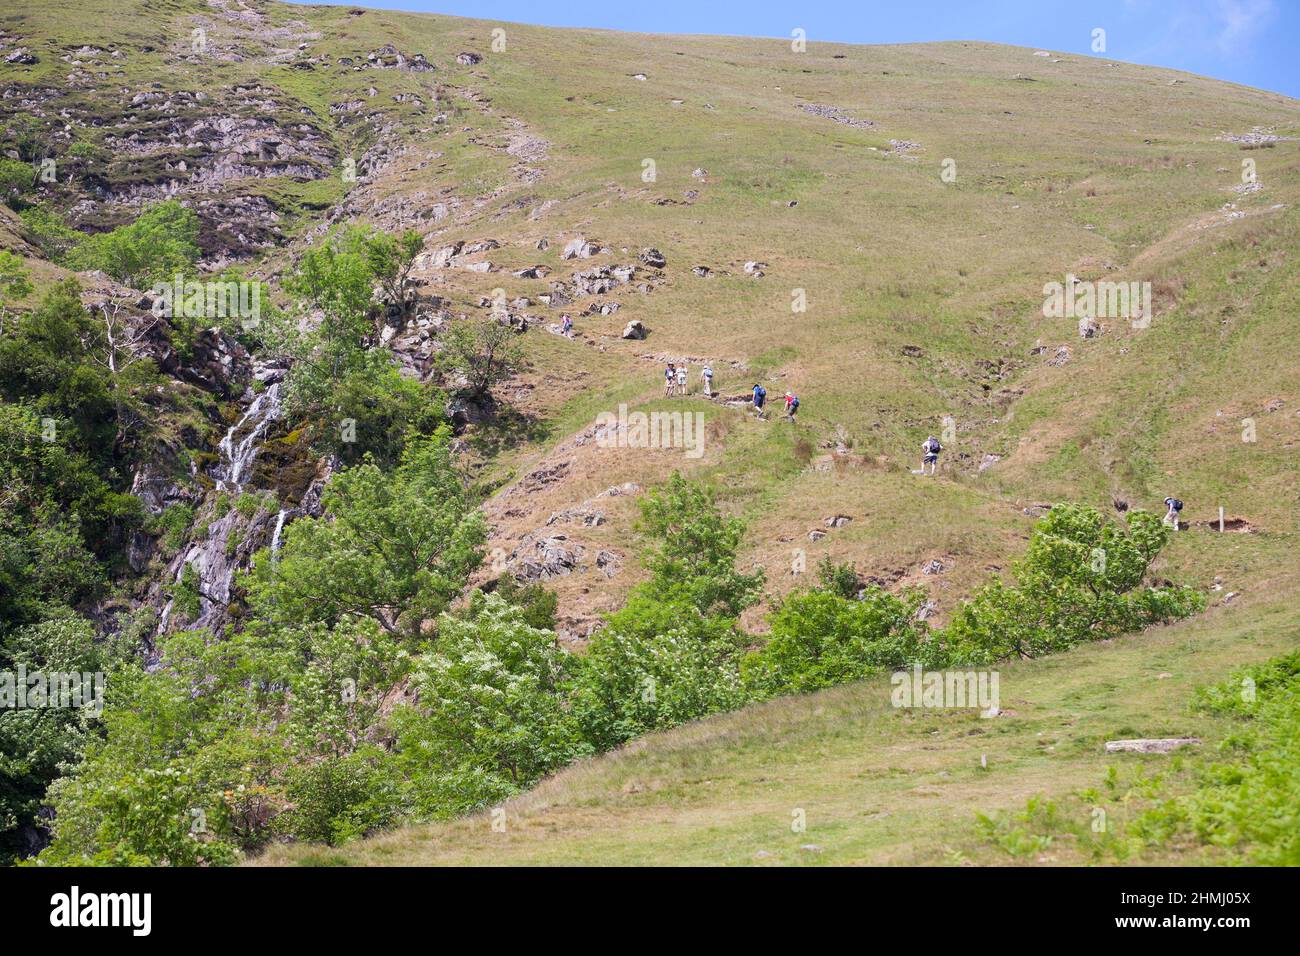 A group of walkers climbing Howgill Fells next to Cautley Spout waterfall, near Sedbergh, Cumbria, England, UK Stock Photo